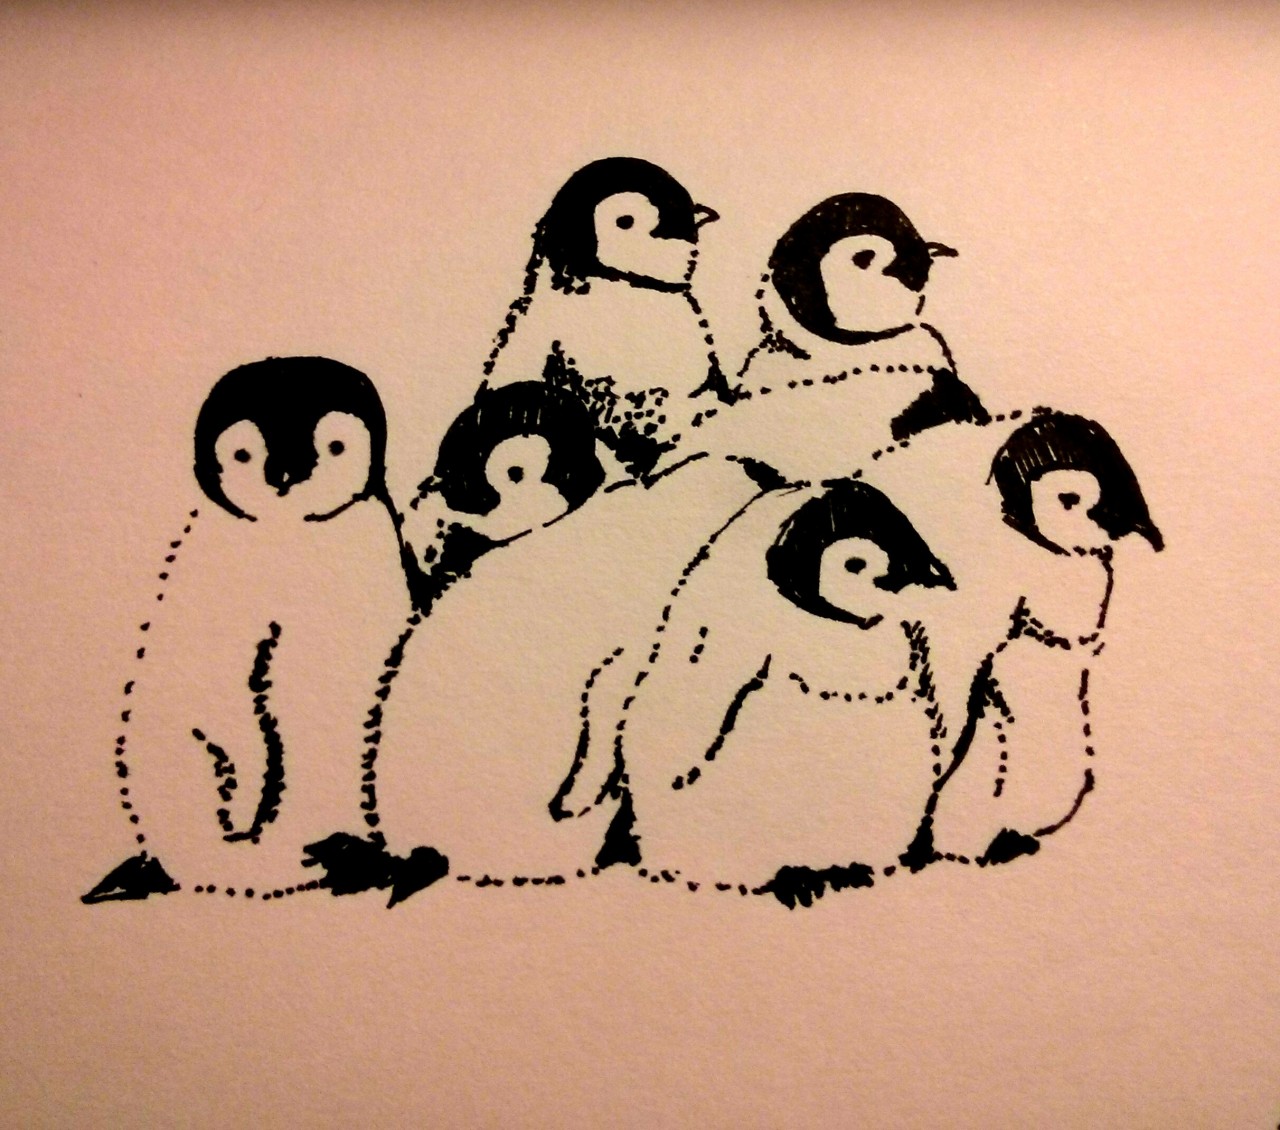 http://hazeyk.tumblr.com/post/73029040568/daily-draw-63-a-pile-of-baby-penguins